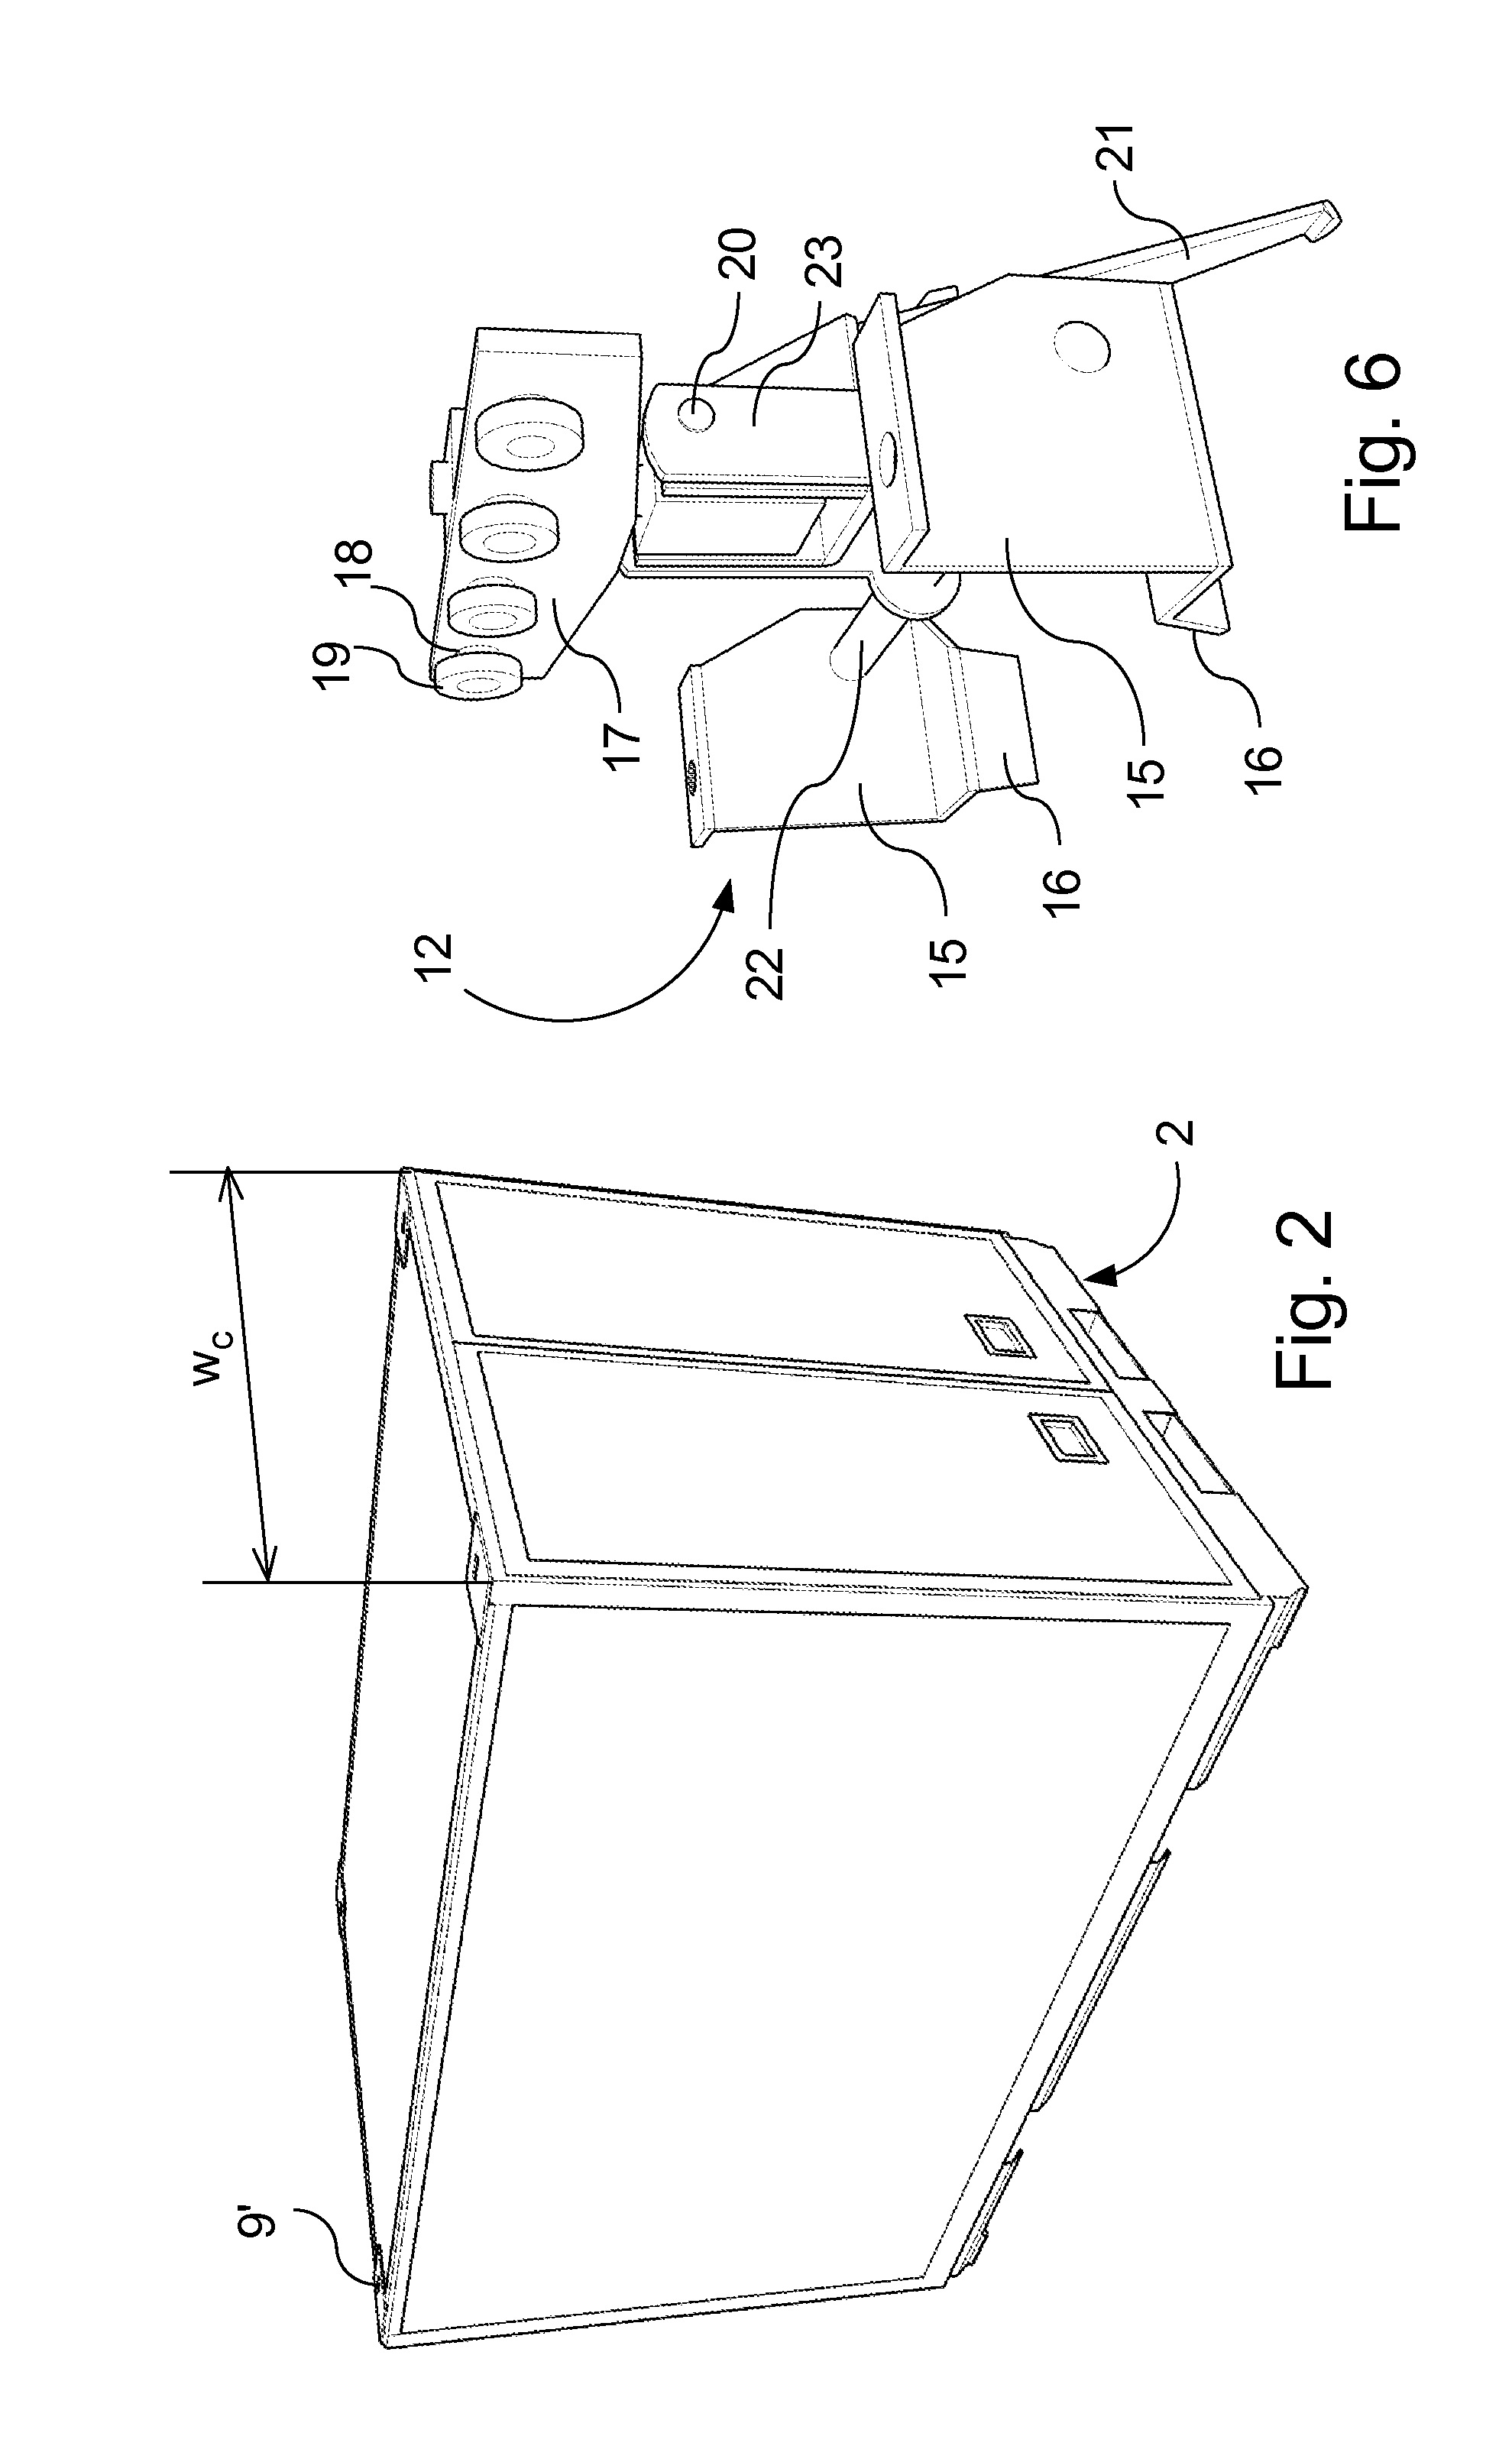 Attachment structure for supporting and releasably attaching a container, a corresponding support structure, a transport vehicle and a container